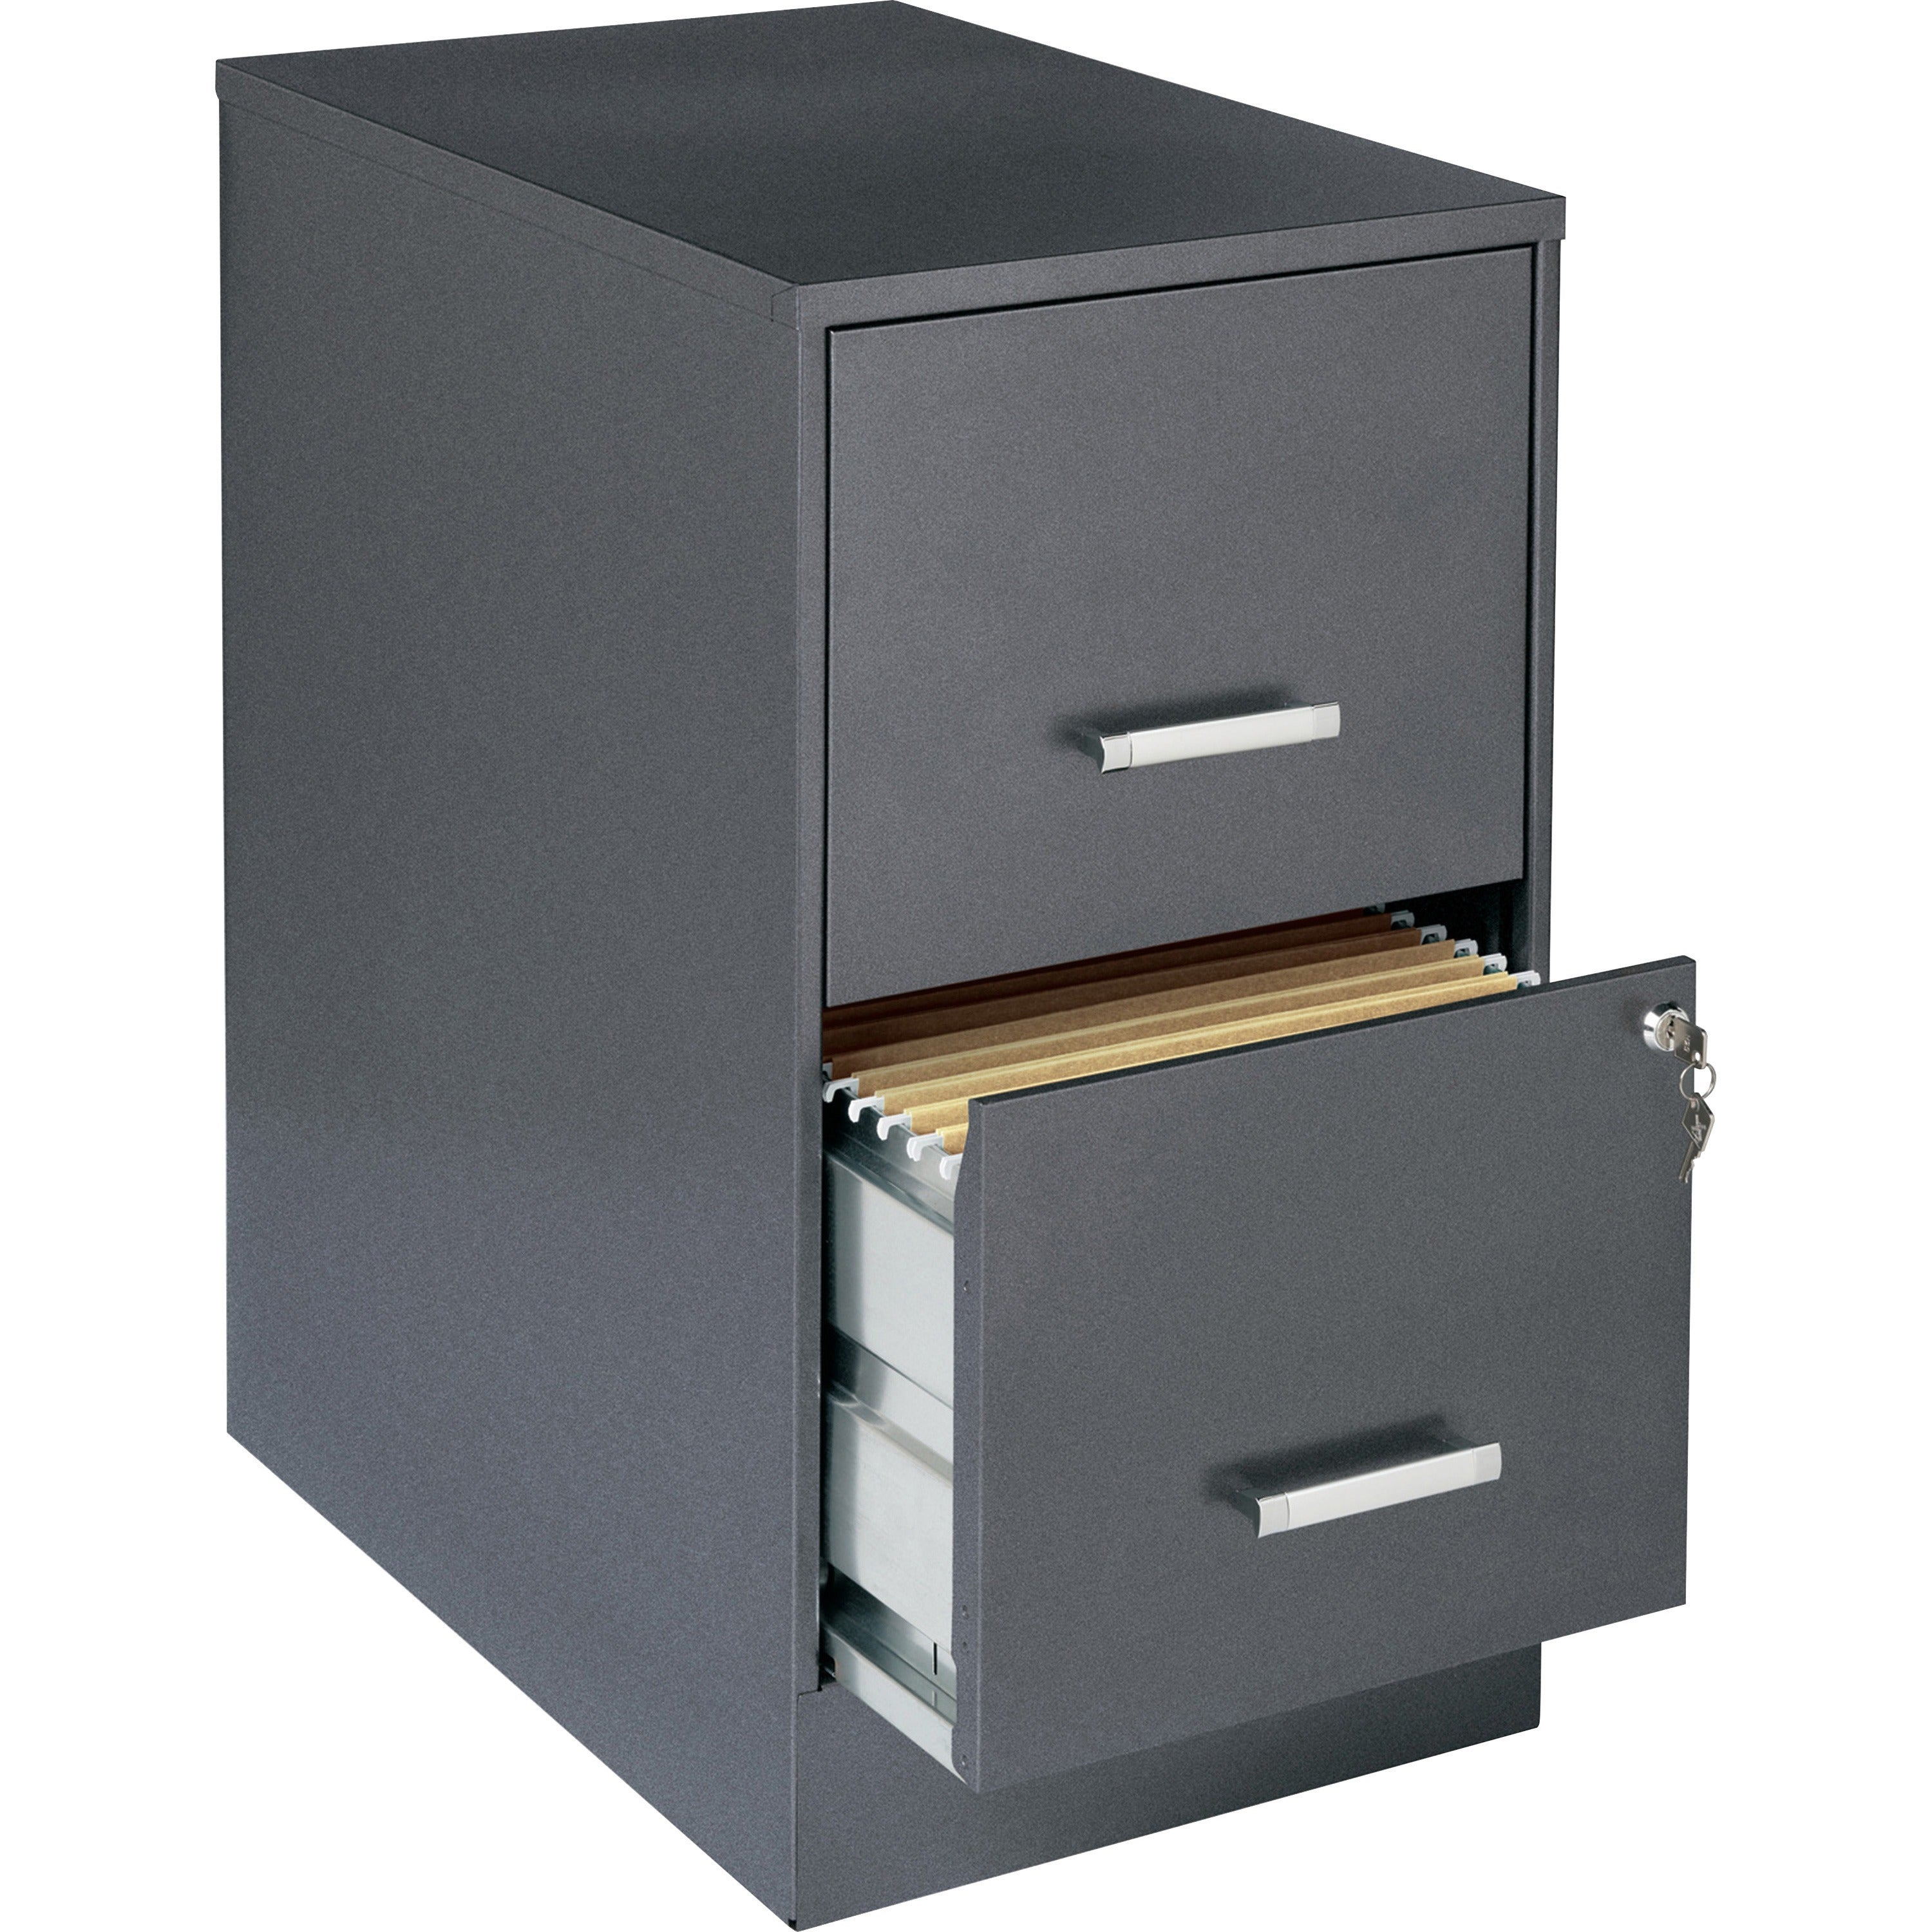 nusparc-metal-vertical-file-cabinet-142-x-22-x-266-2-x-drawers-for-file-letter-vertical-glide-suspension-3-4-drawer-extension-locking-drawer-anti-tip-metallic-charcoal-metal-recycled_nprvf222aaml - 1